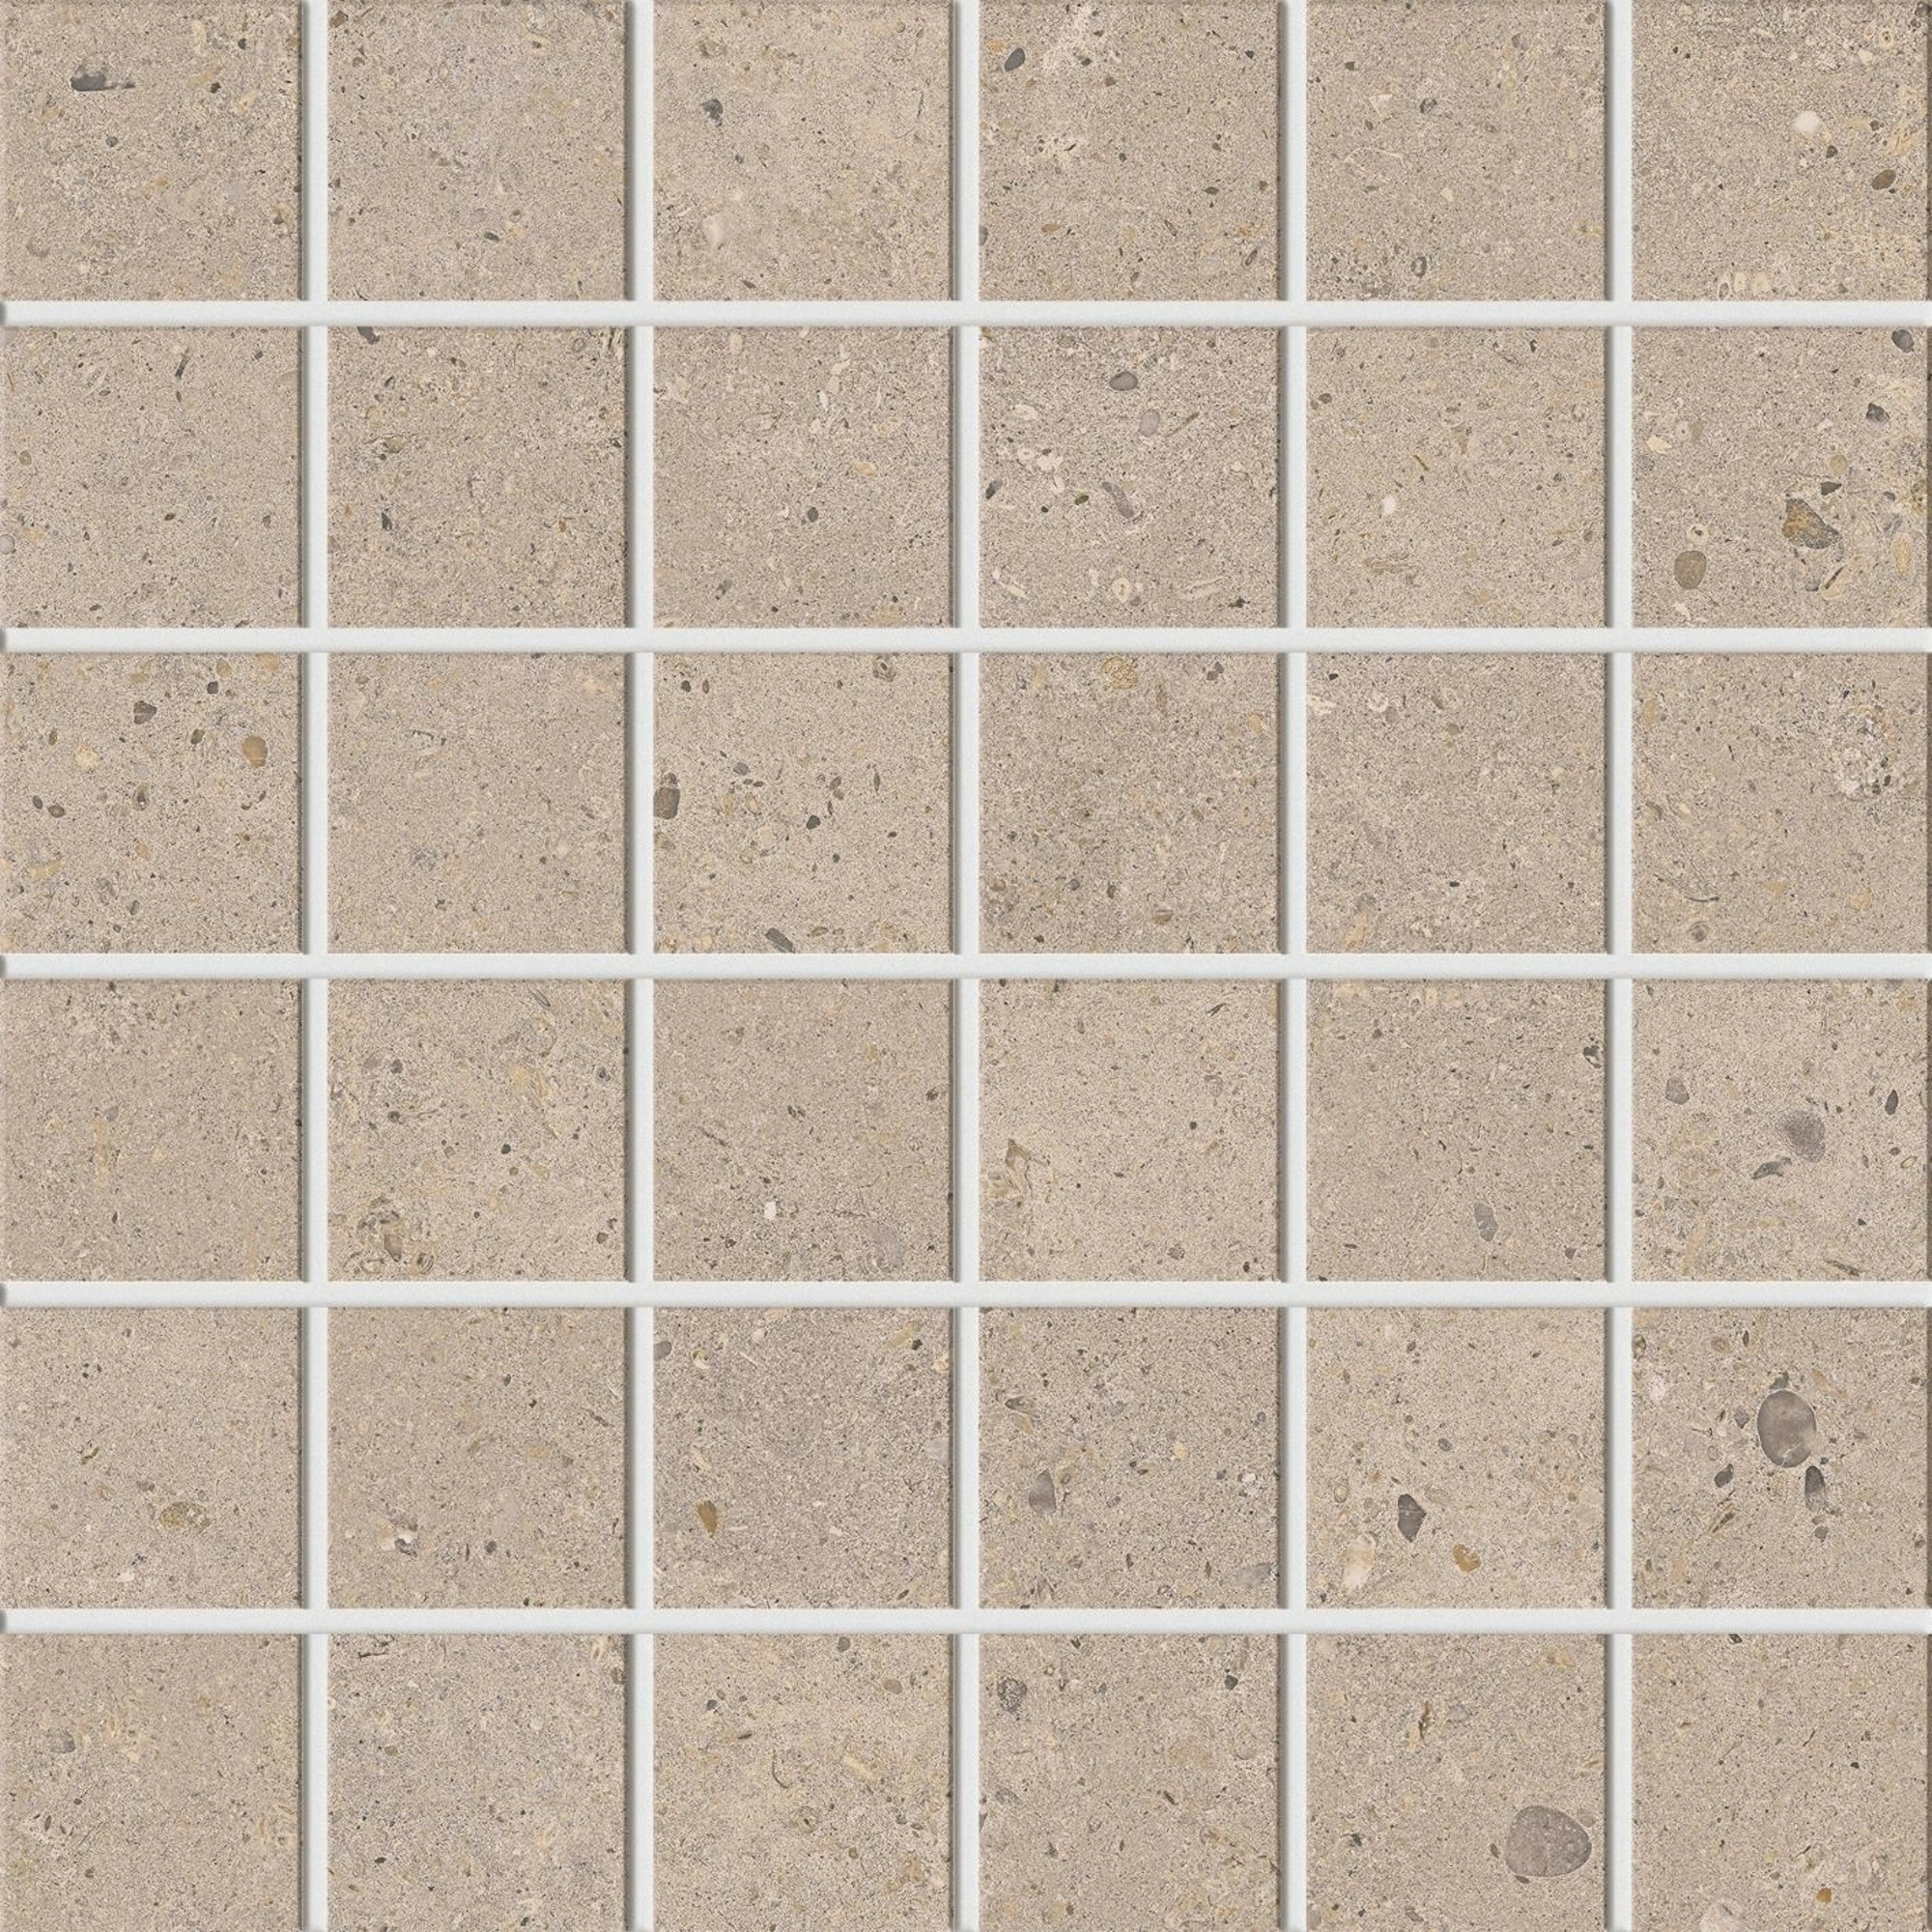 Coolstone Grey Mosaic Tile Clearance